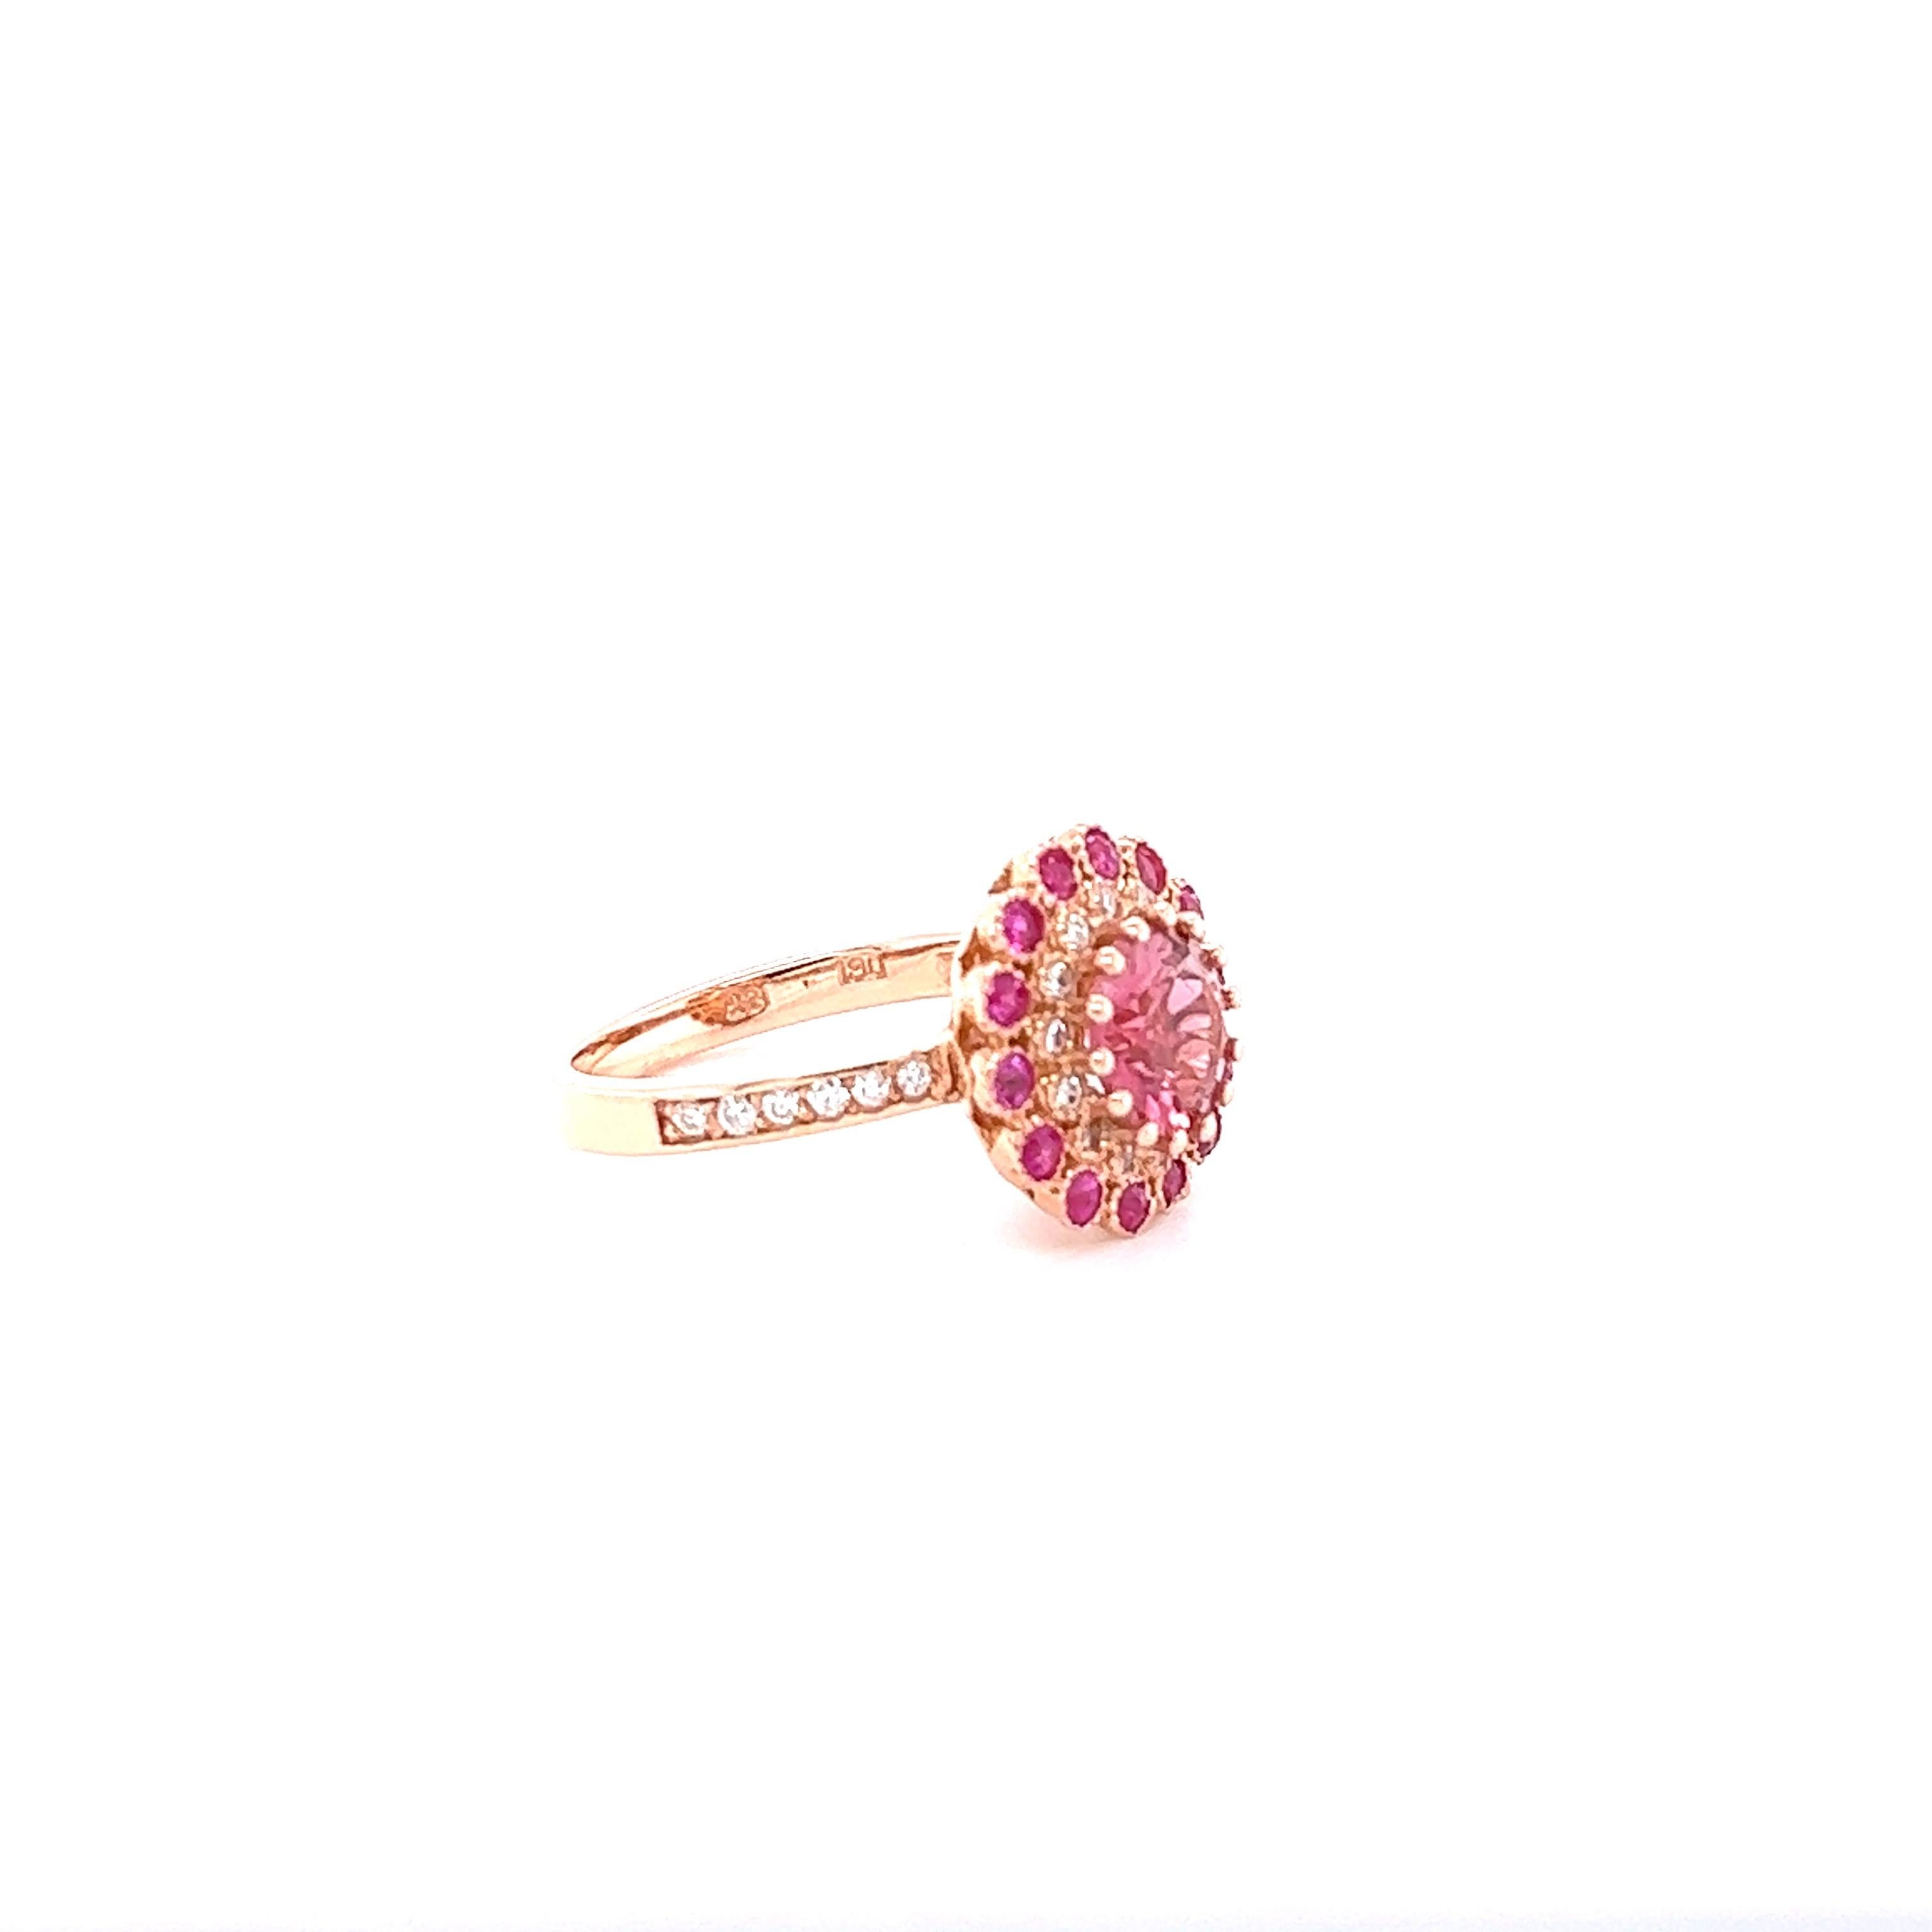 This beauty has a Round Cut Pink Tourmaline set in the center of the ring that weighs 1.79 carats and measures at 8 mm.  It is surrounded by 14 Round Cut Pink Sapphires that weigh 0.54 carats and 26 Round Cut Diamonds that weigh 0.27 carats